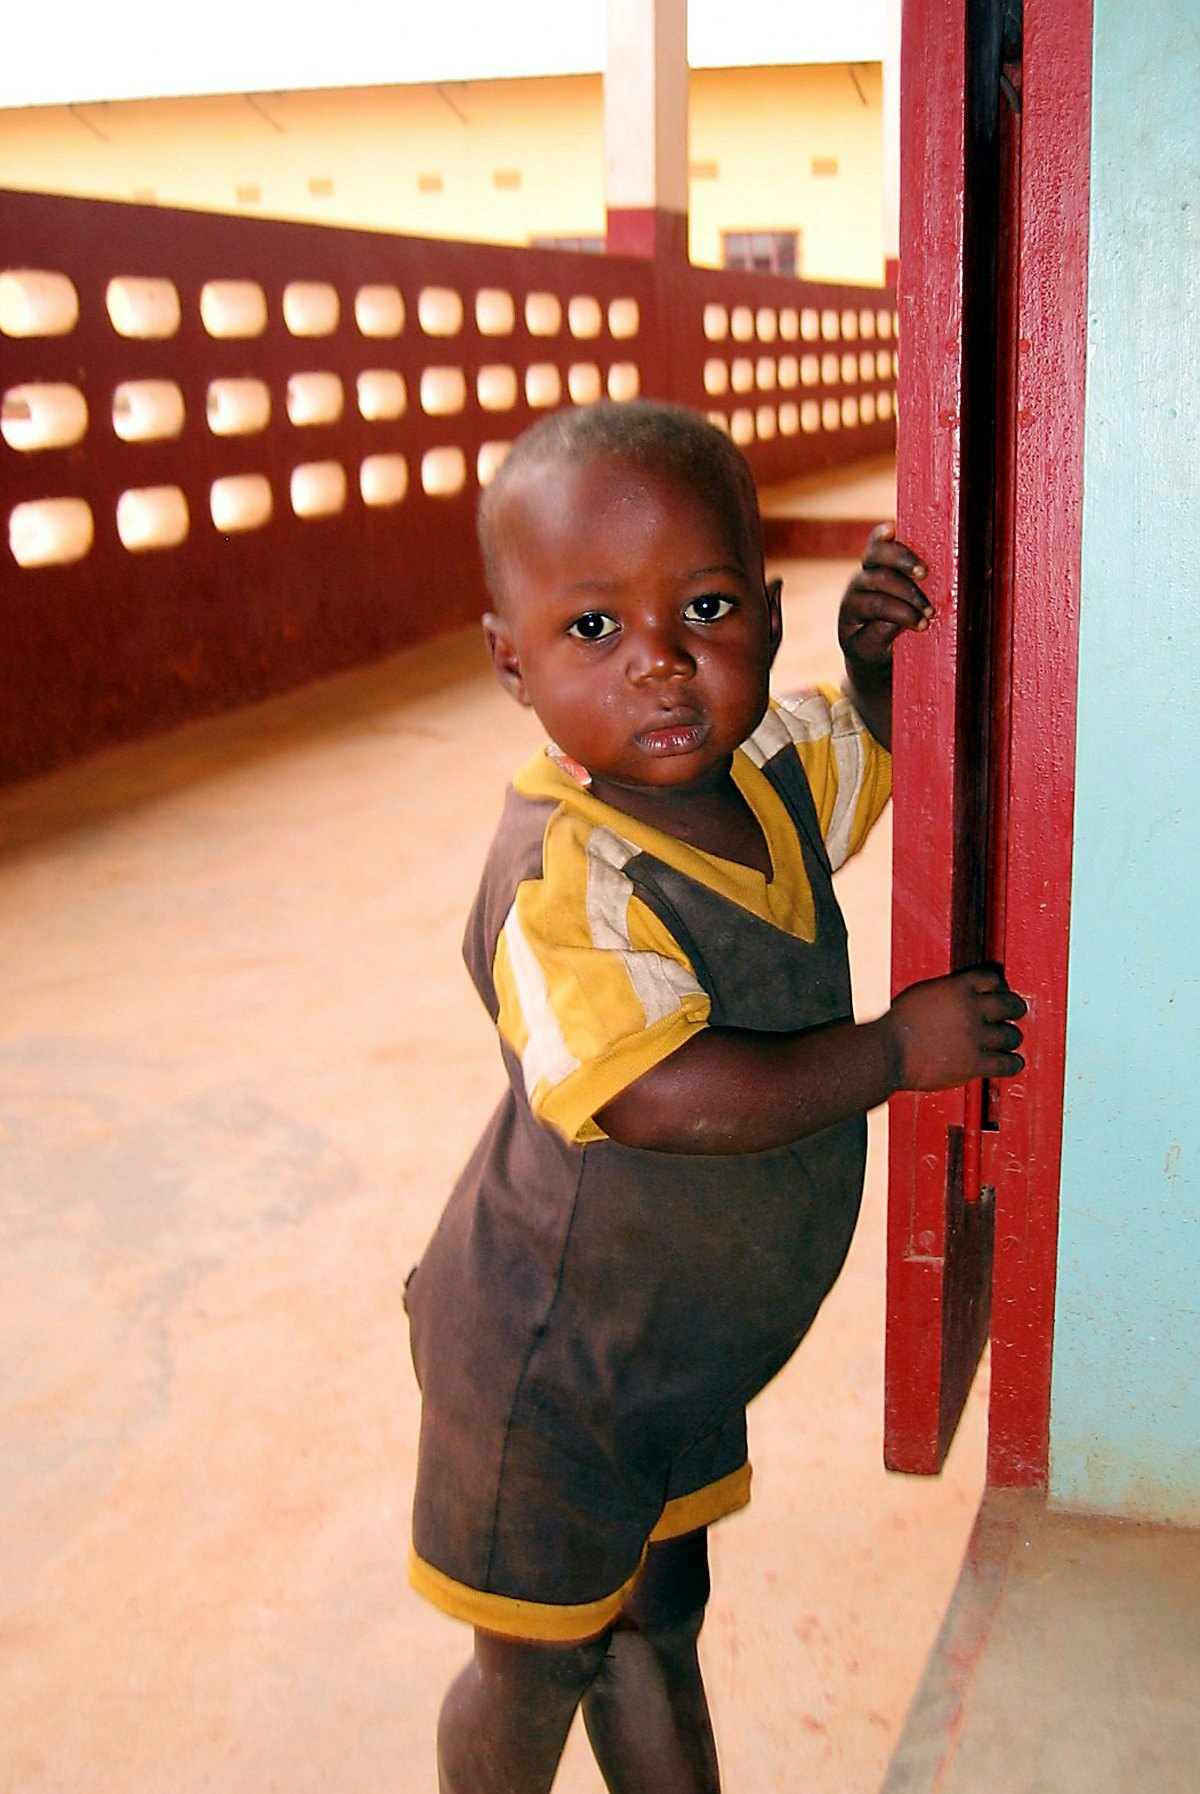 A local boy peeks at the Baha'i youth conference taking place in his neighborhood in N'Zerekore.